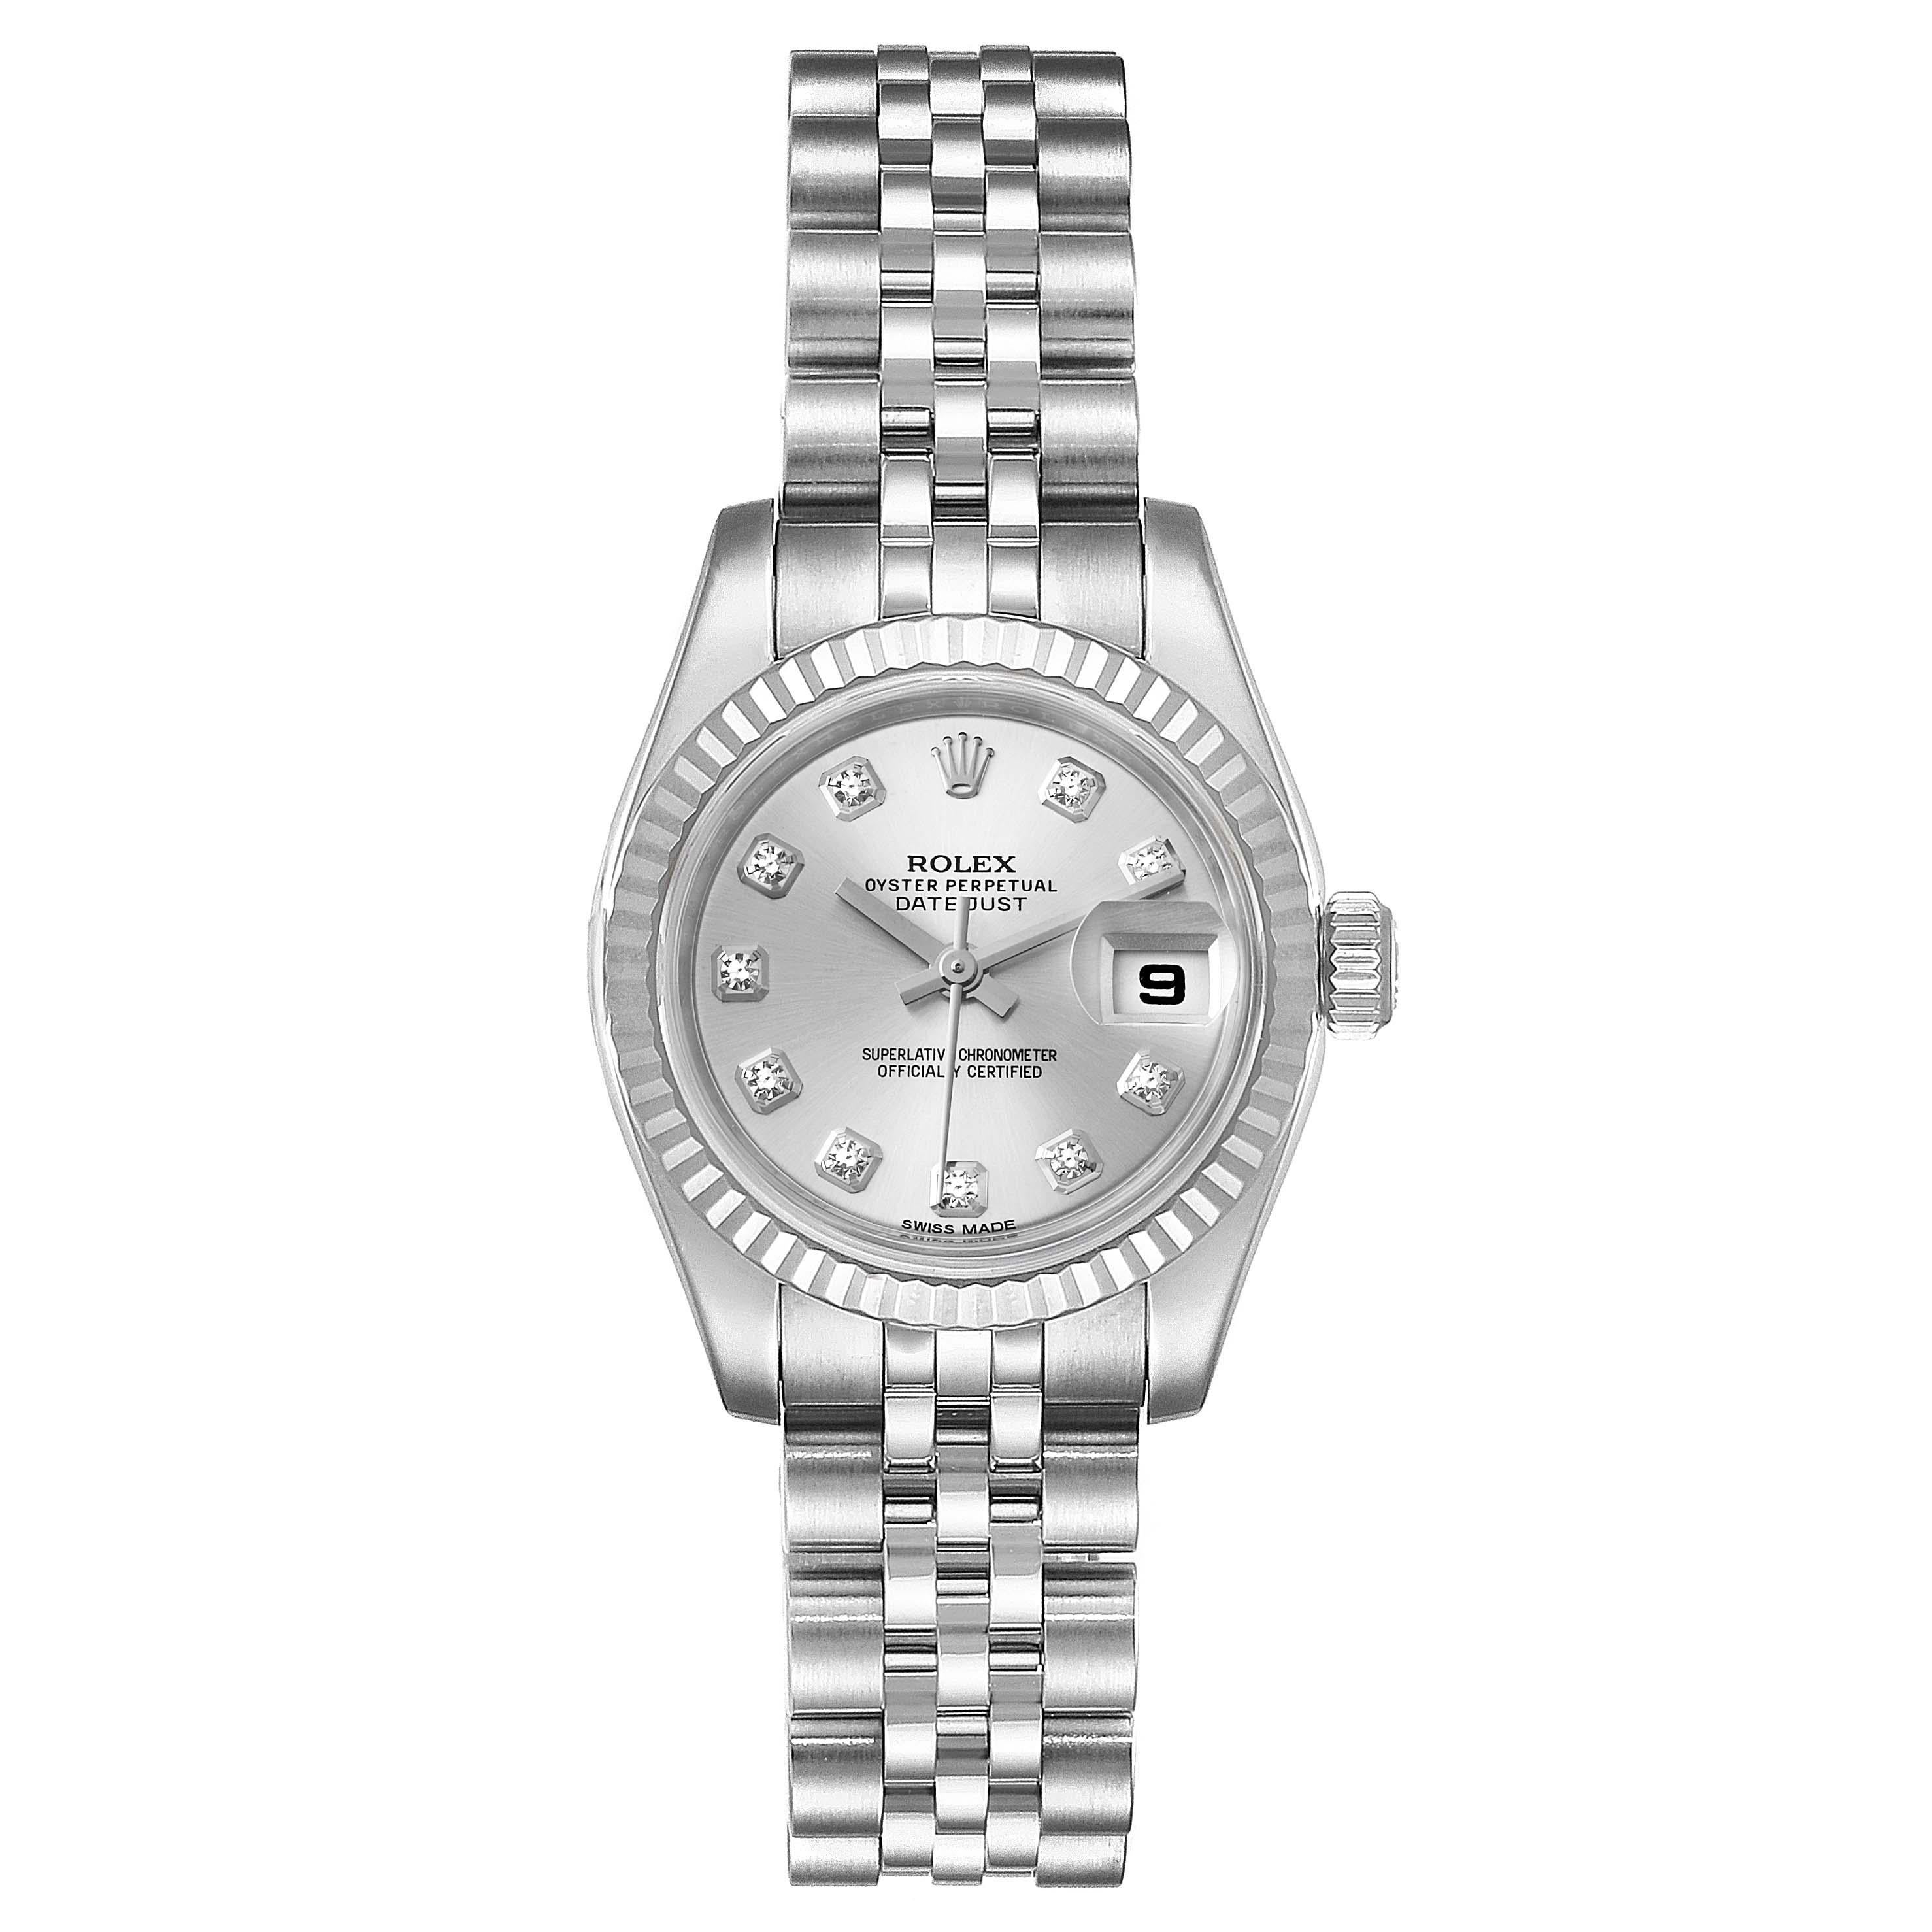 Rolex Datejust Steel White Gold Diamond Ladies Watch 179174 Box Card. Officially certified chronometer self-winding movement. Stainless steel oyster case 26.0 mm in diameter. Rolex logo on a crown. 18K white gold fluted bezel. Scratch resistant